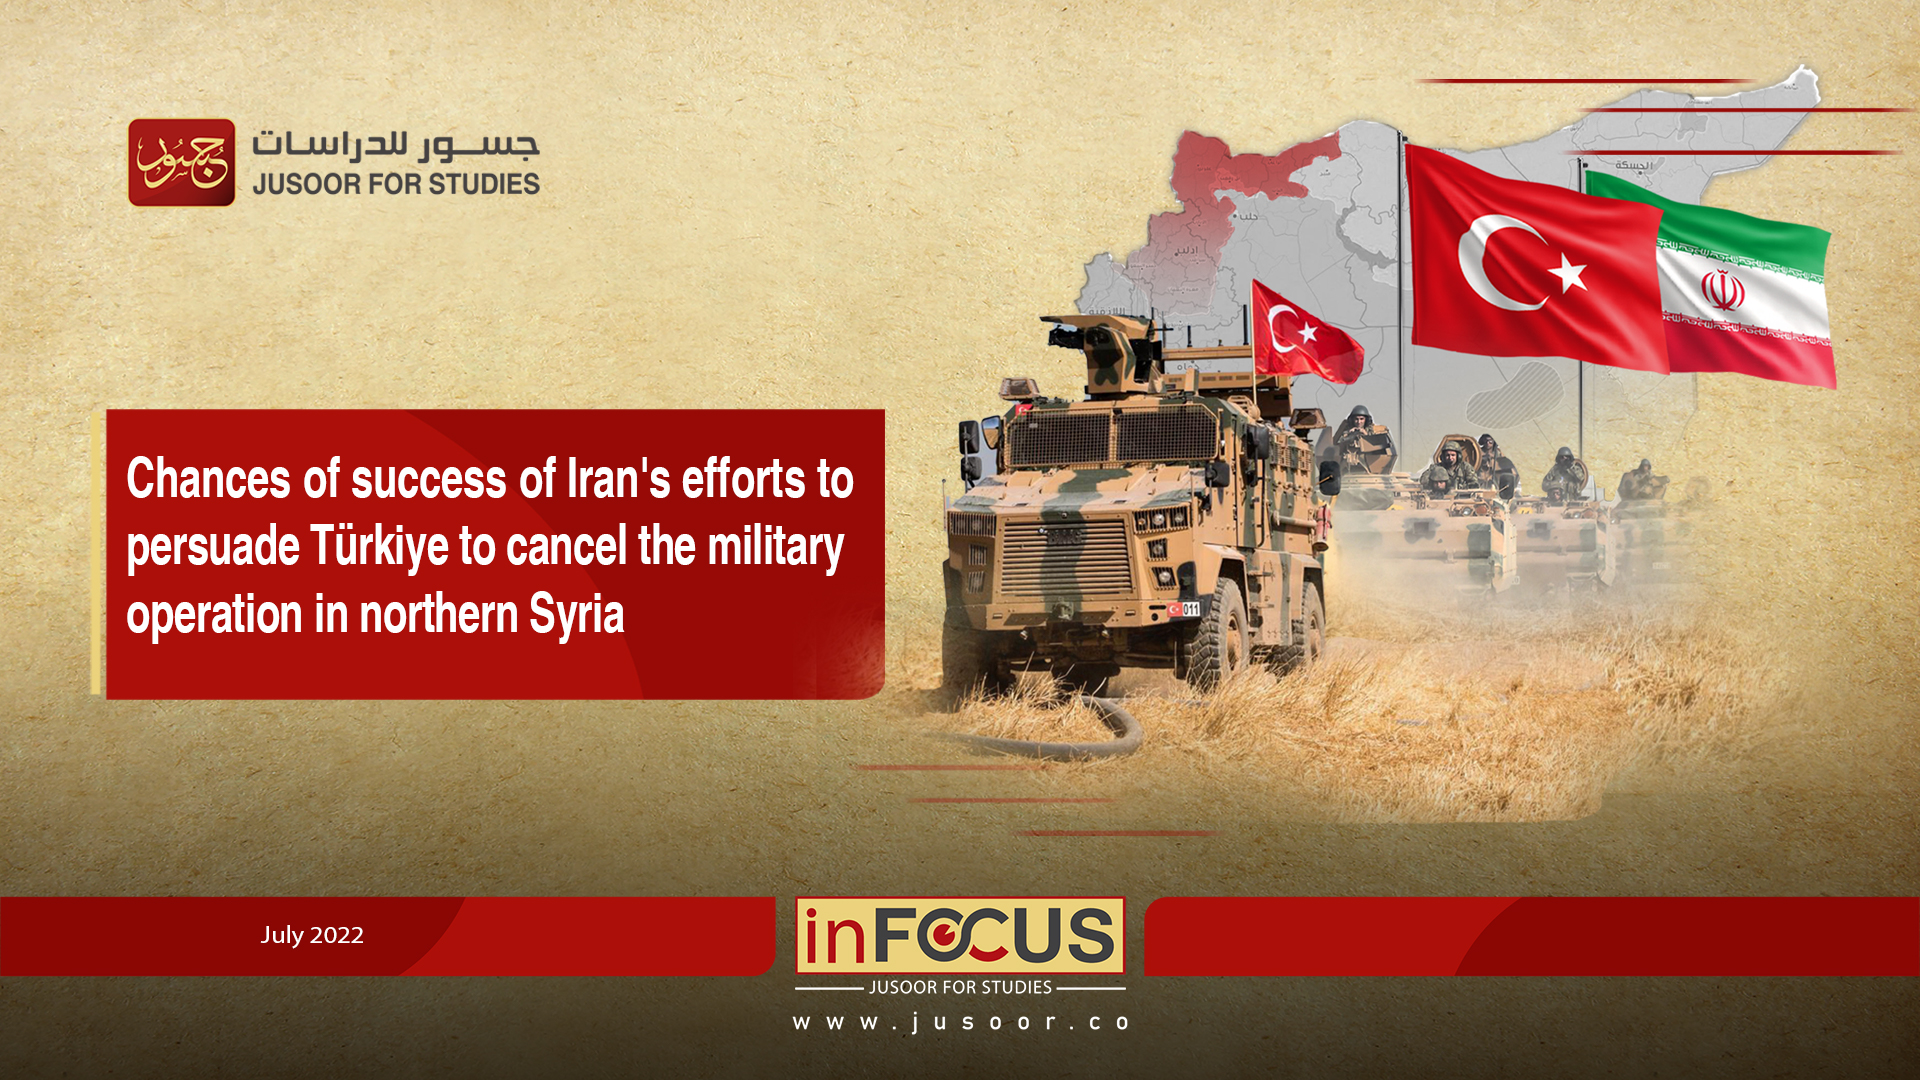 Chances of success of Iran's efforts to persuade Türkiye to cancel the military operation in northern Syria